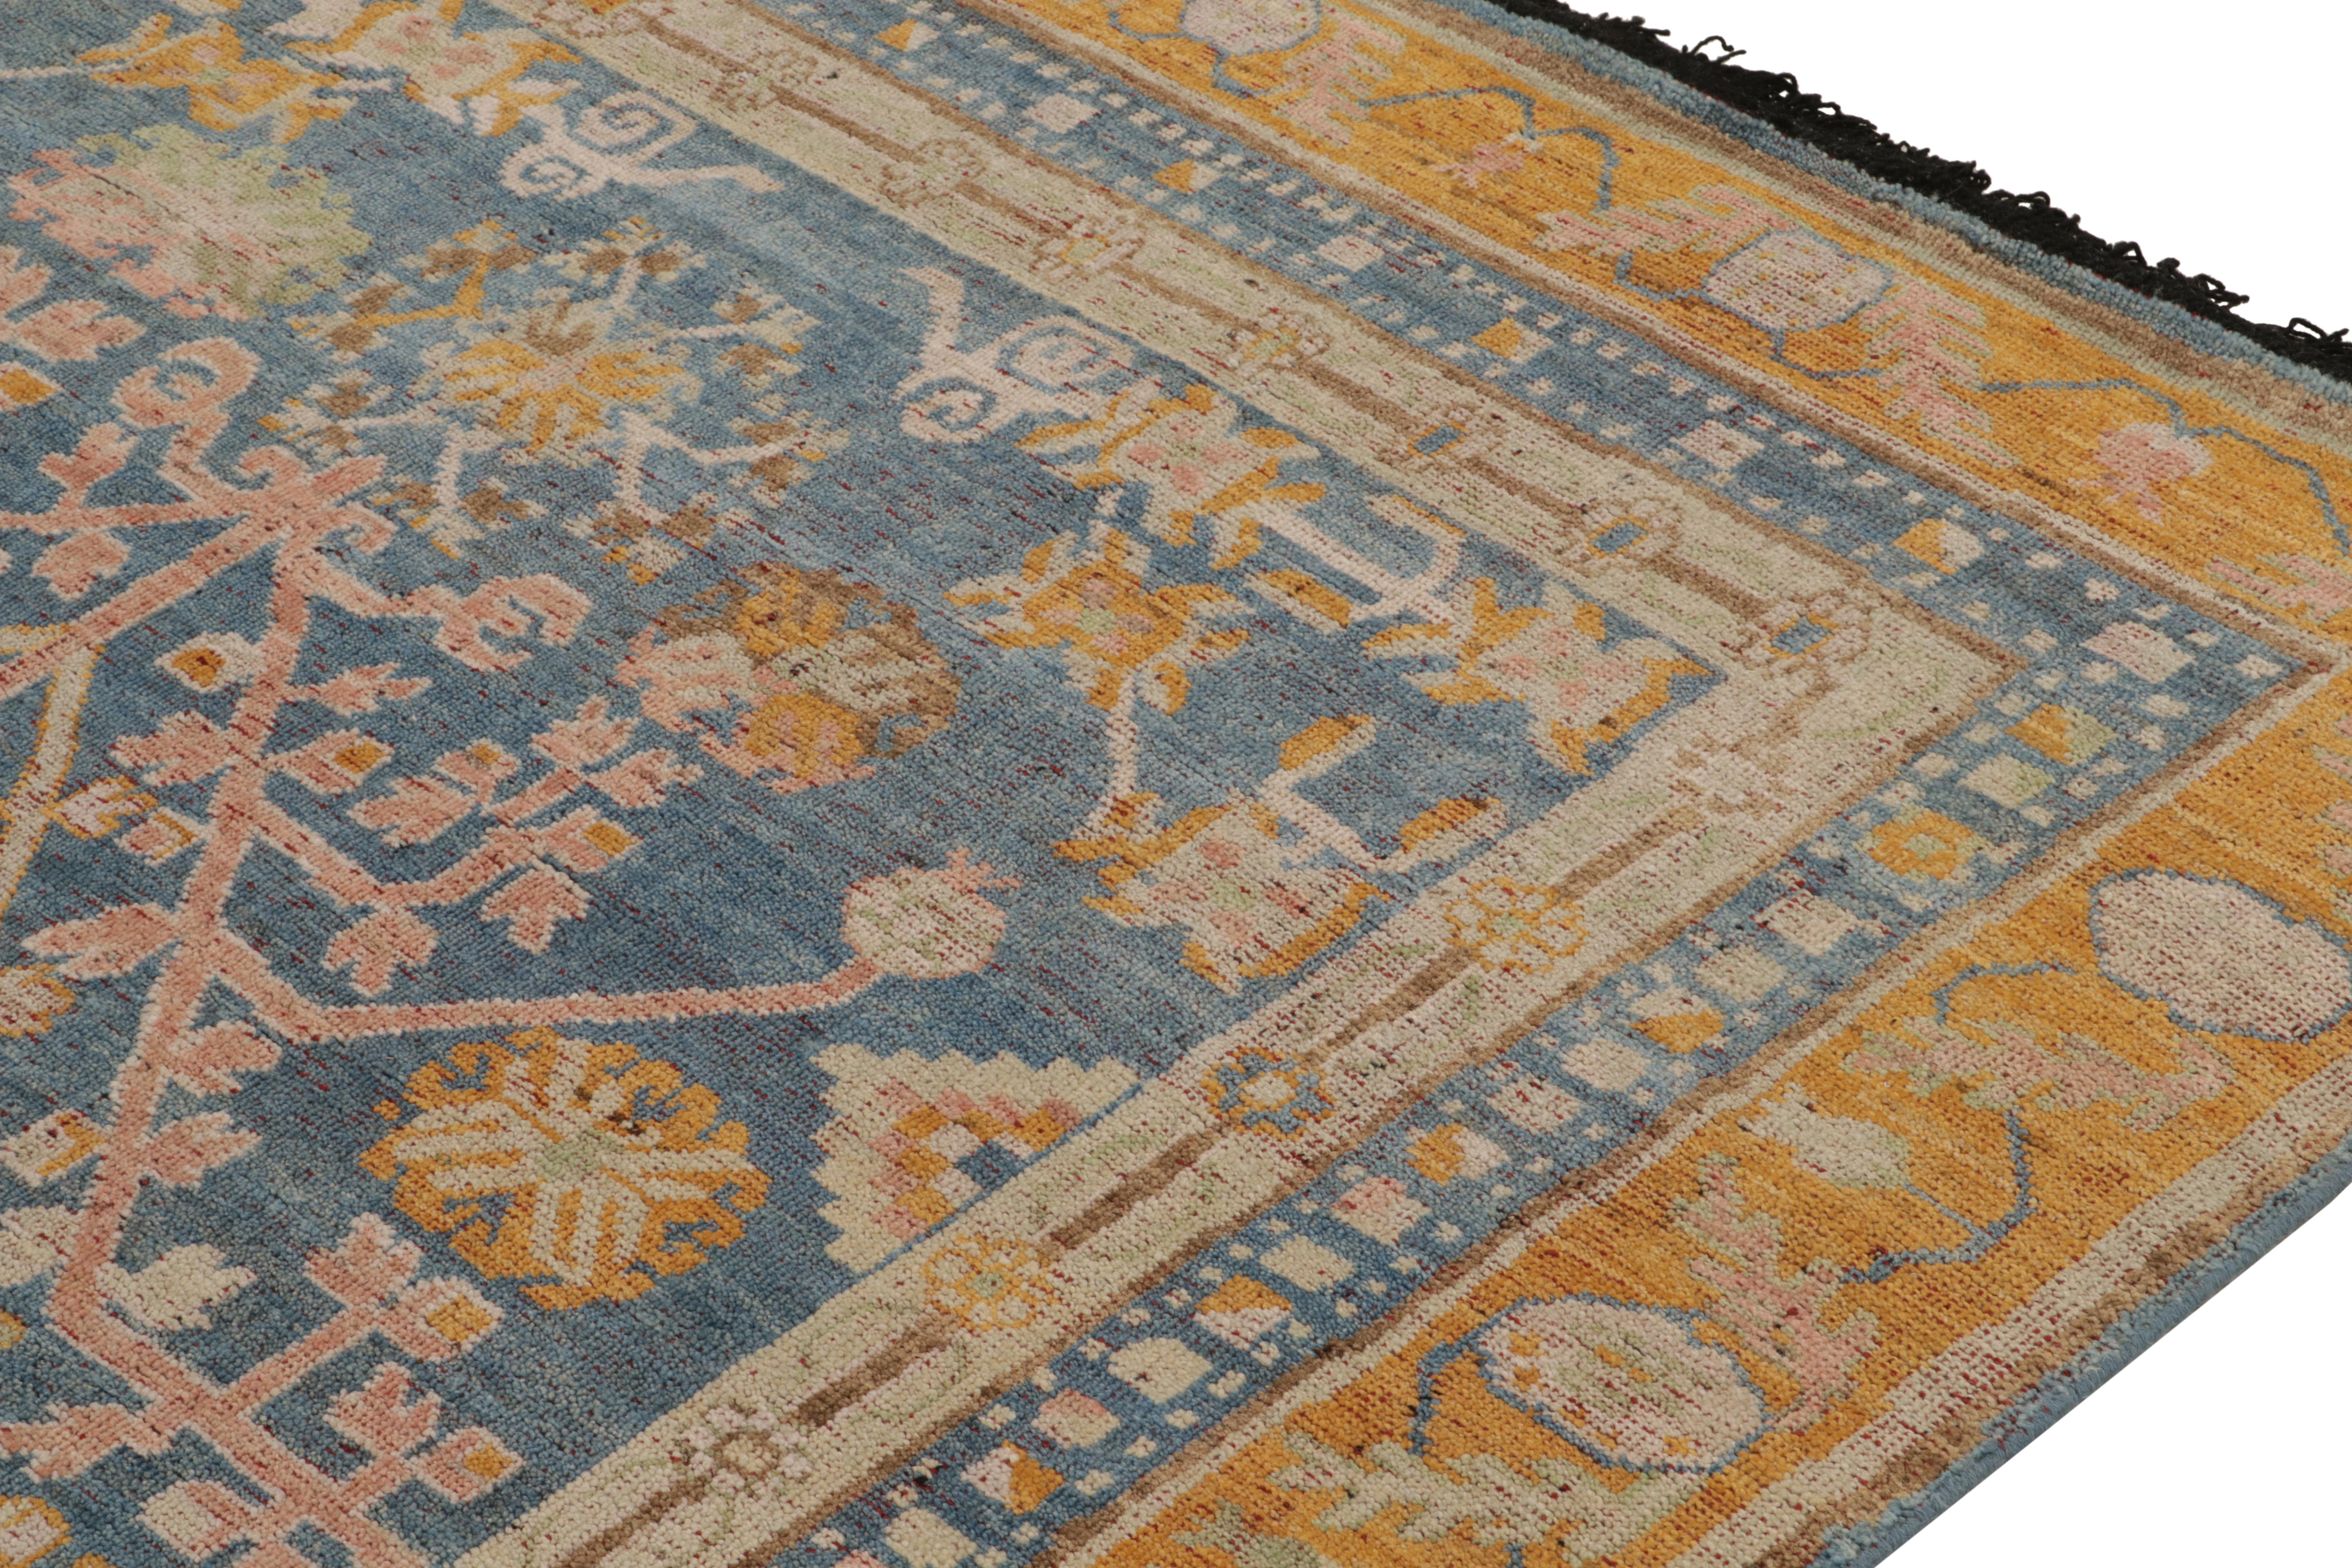 Rug & Kilim’s Khotan Style Rug in Blue, Gold and Pink Geometric-Floral Patterns In New Condition For Sale In Long Island City, NY